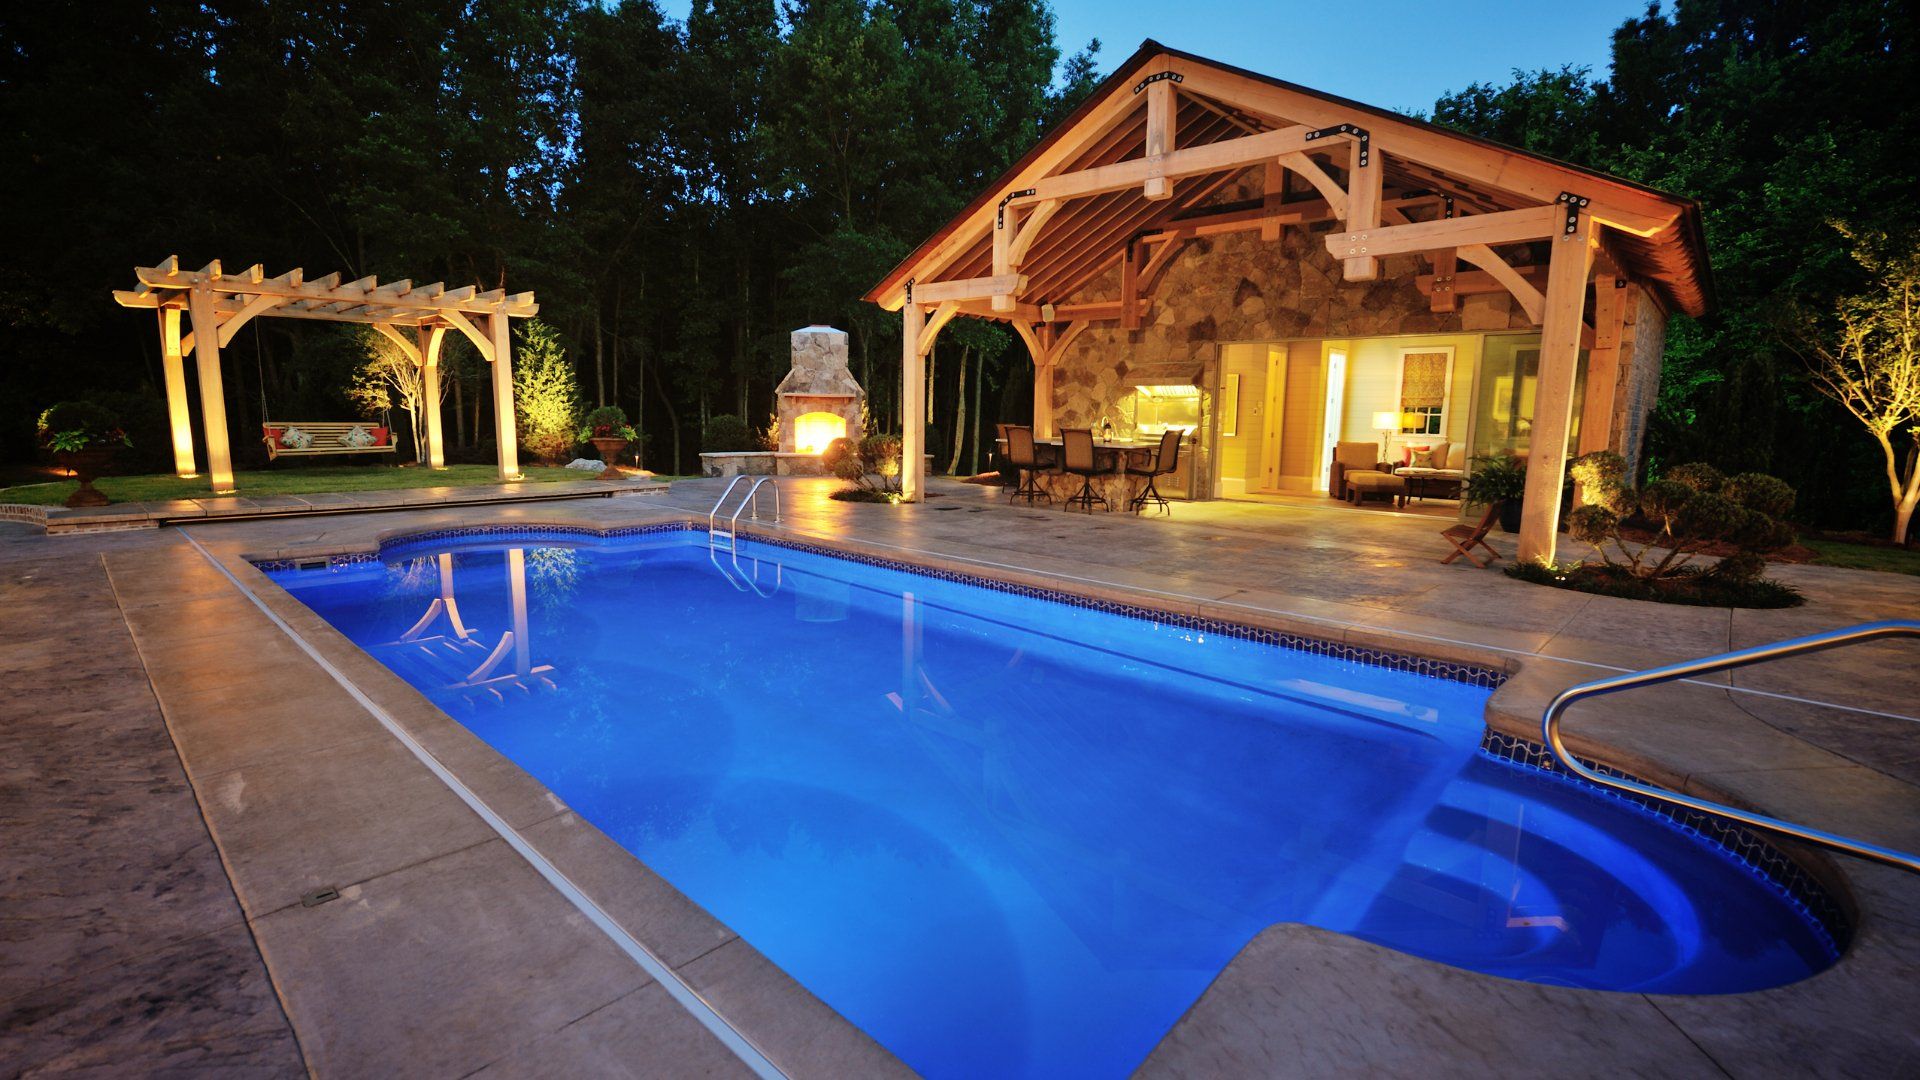 Backyard pool at night.  The pool is lit up.  The backyard also features a covered patio and pergola.  The deck around the pool is stamped concrete.